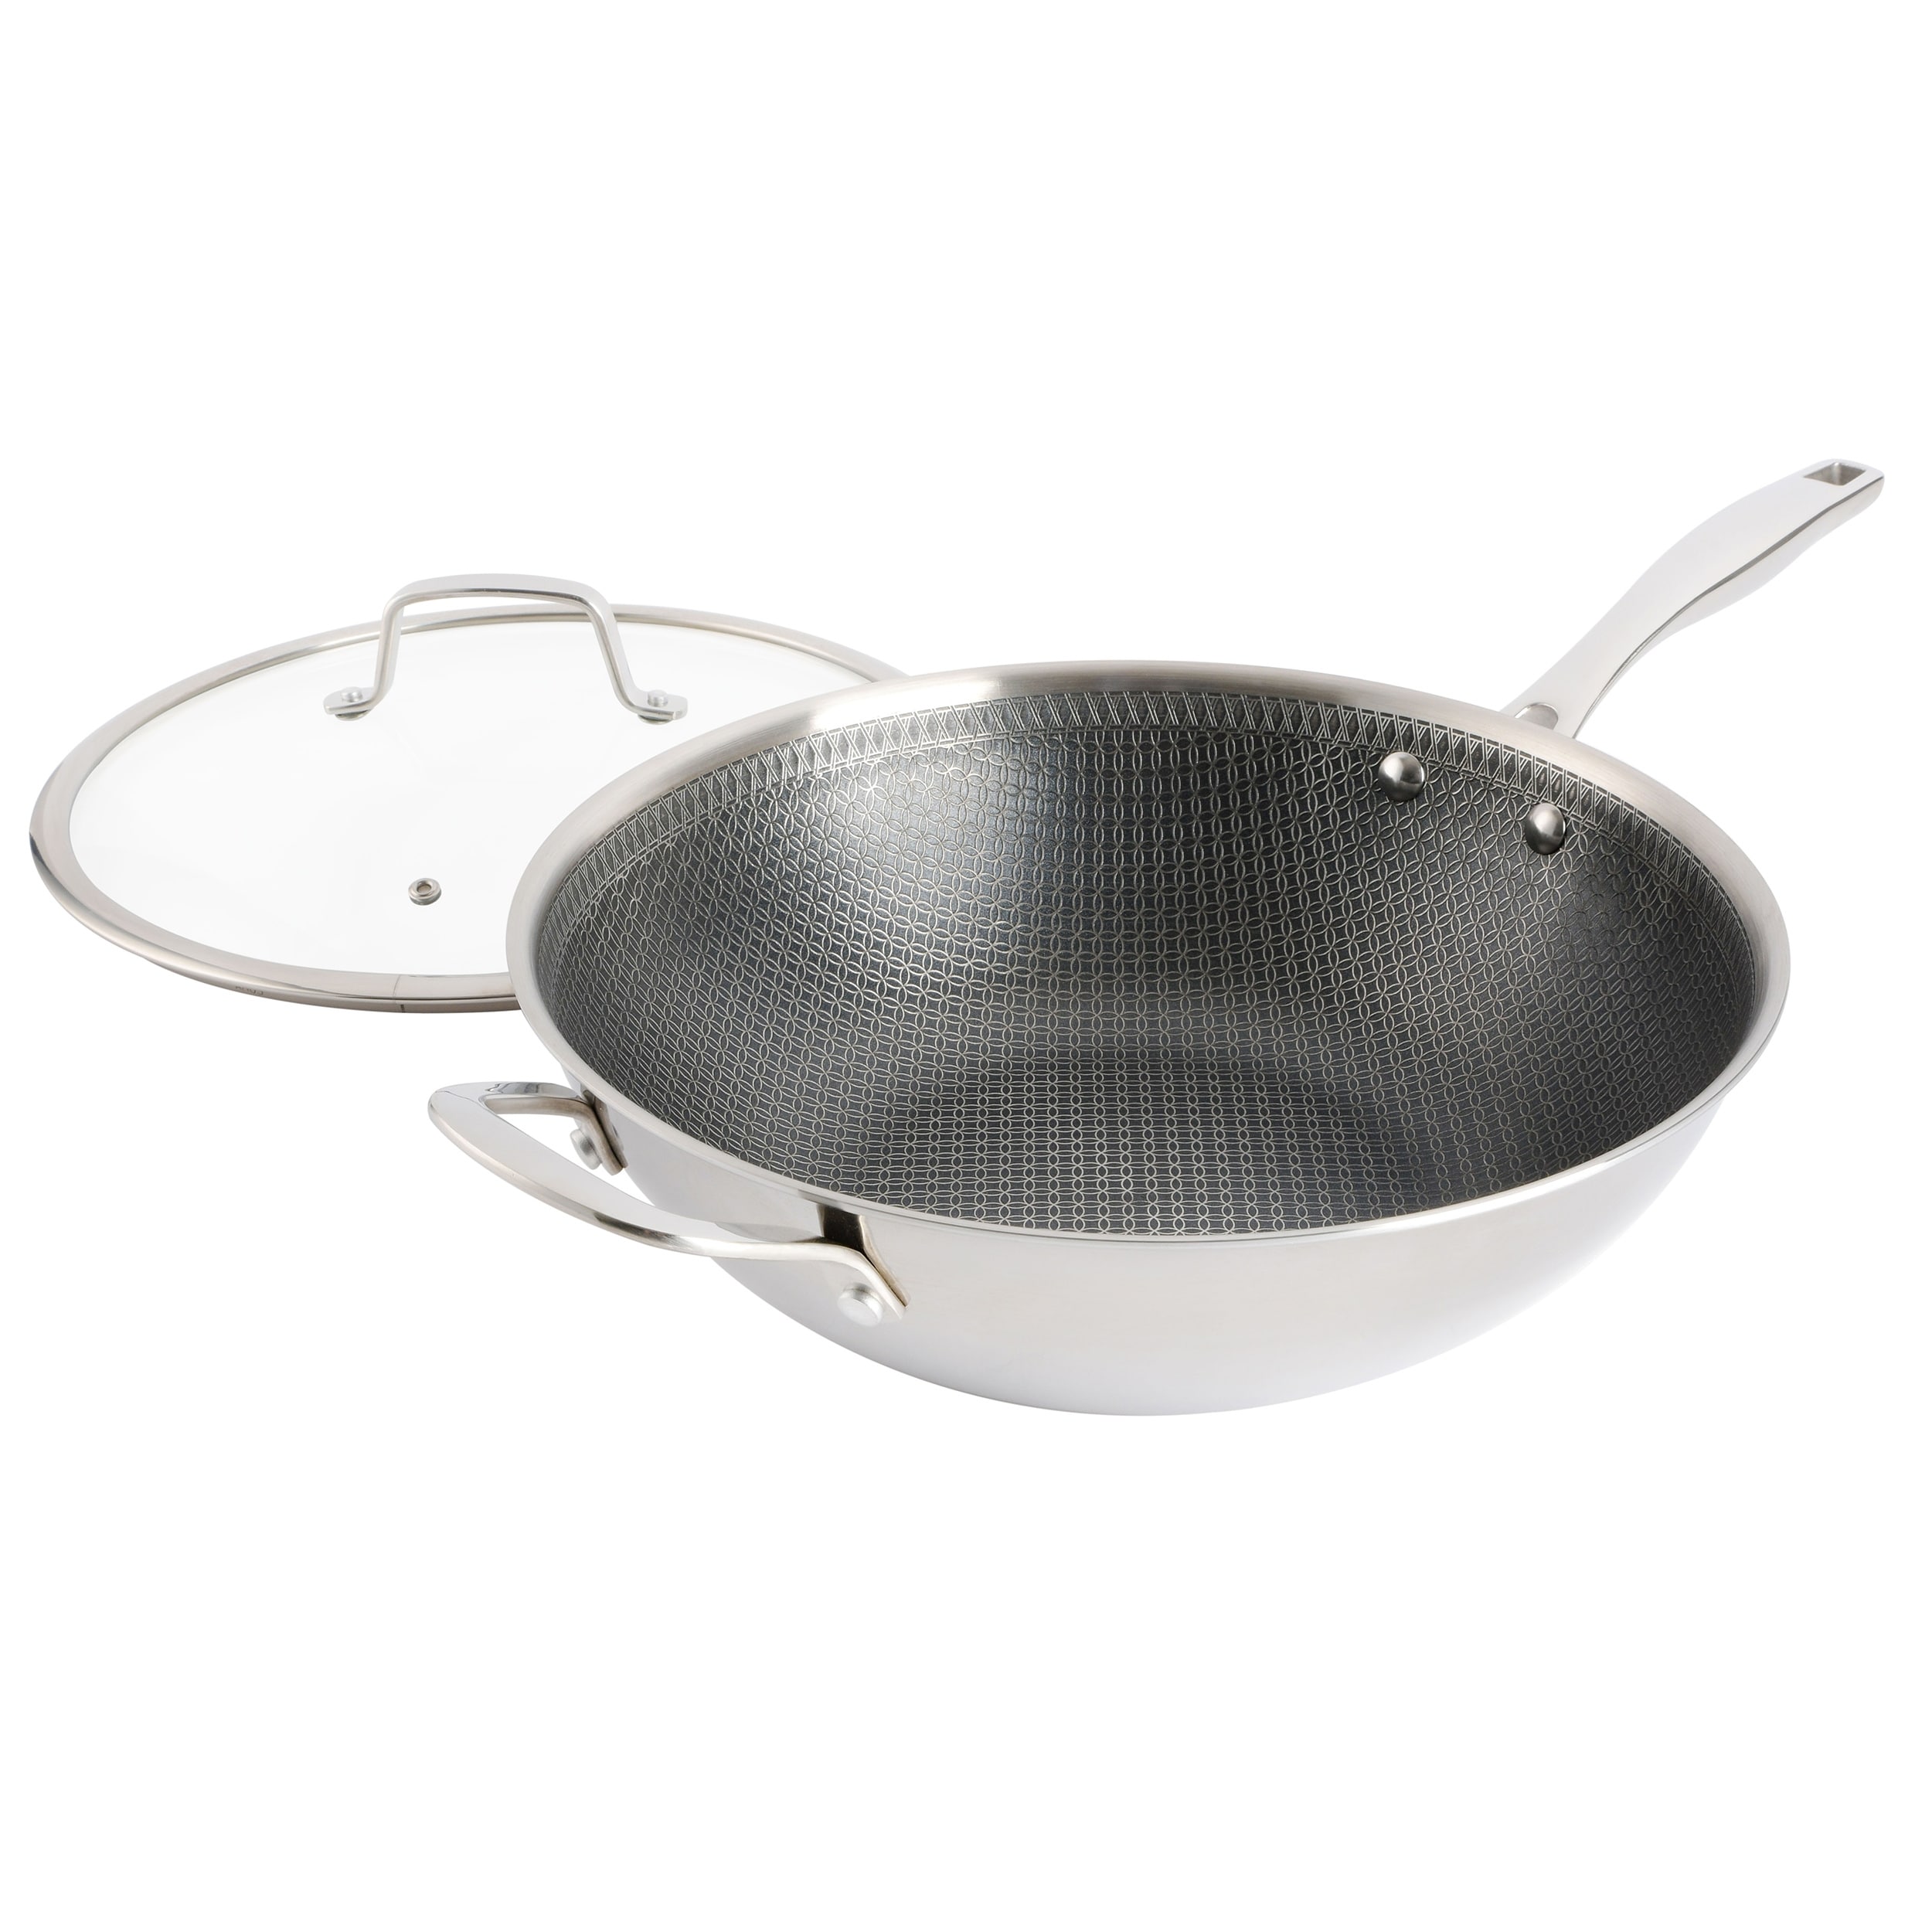 https://ak1.ostkcdn.com/images/products/is/images/direct/fa0f28d6784ba8f8b2c6b8552b018f0074338d26/Kenmore-Elite-Luke-12-Inch-Non-Stick-Tri-Ply-Stainless-Steel-Wok.jpg